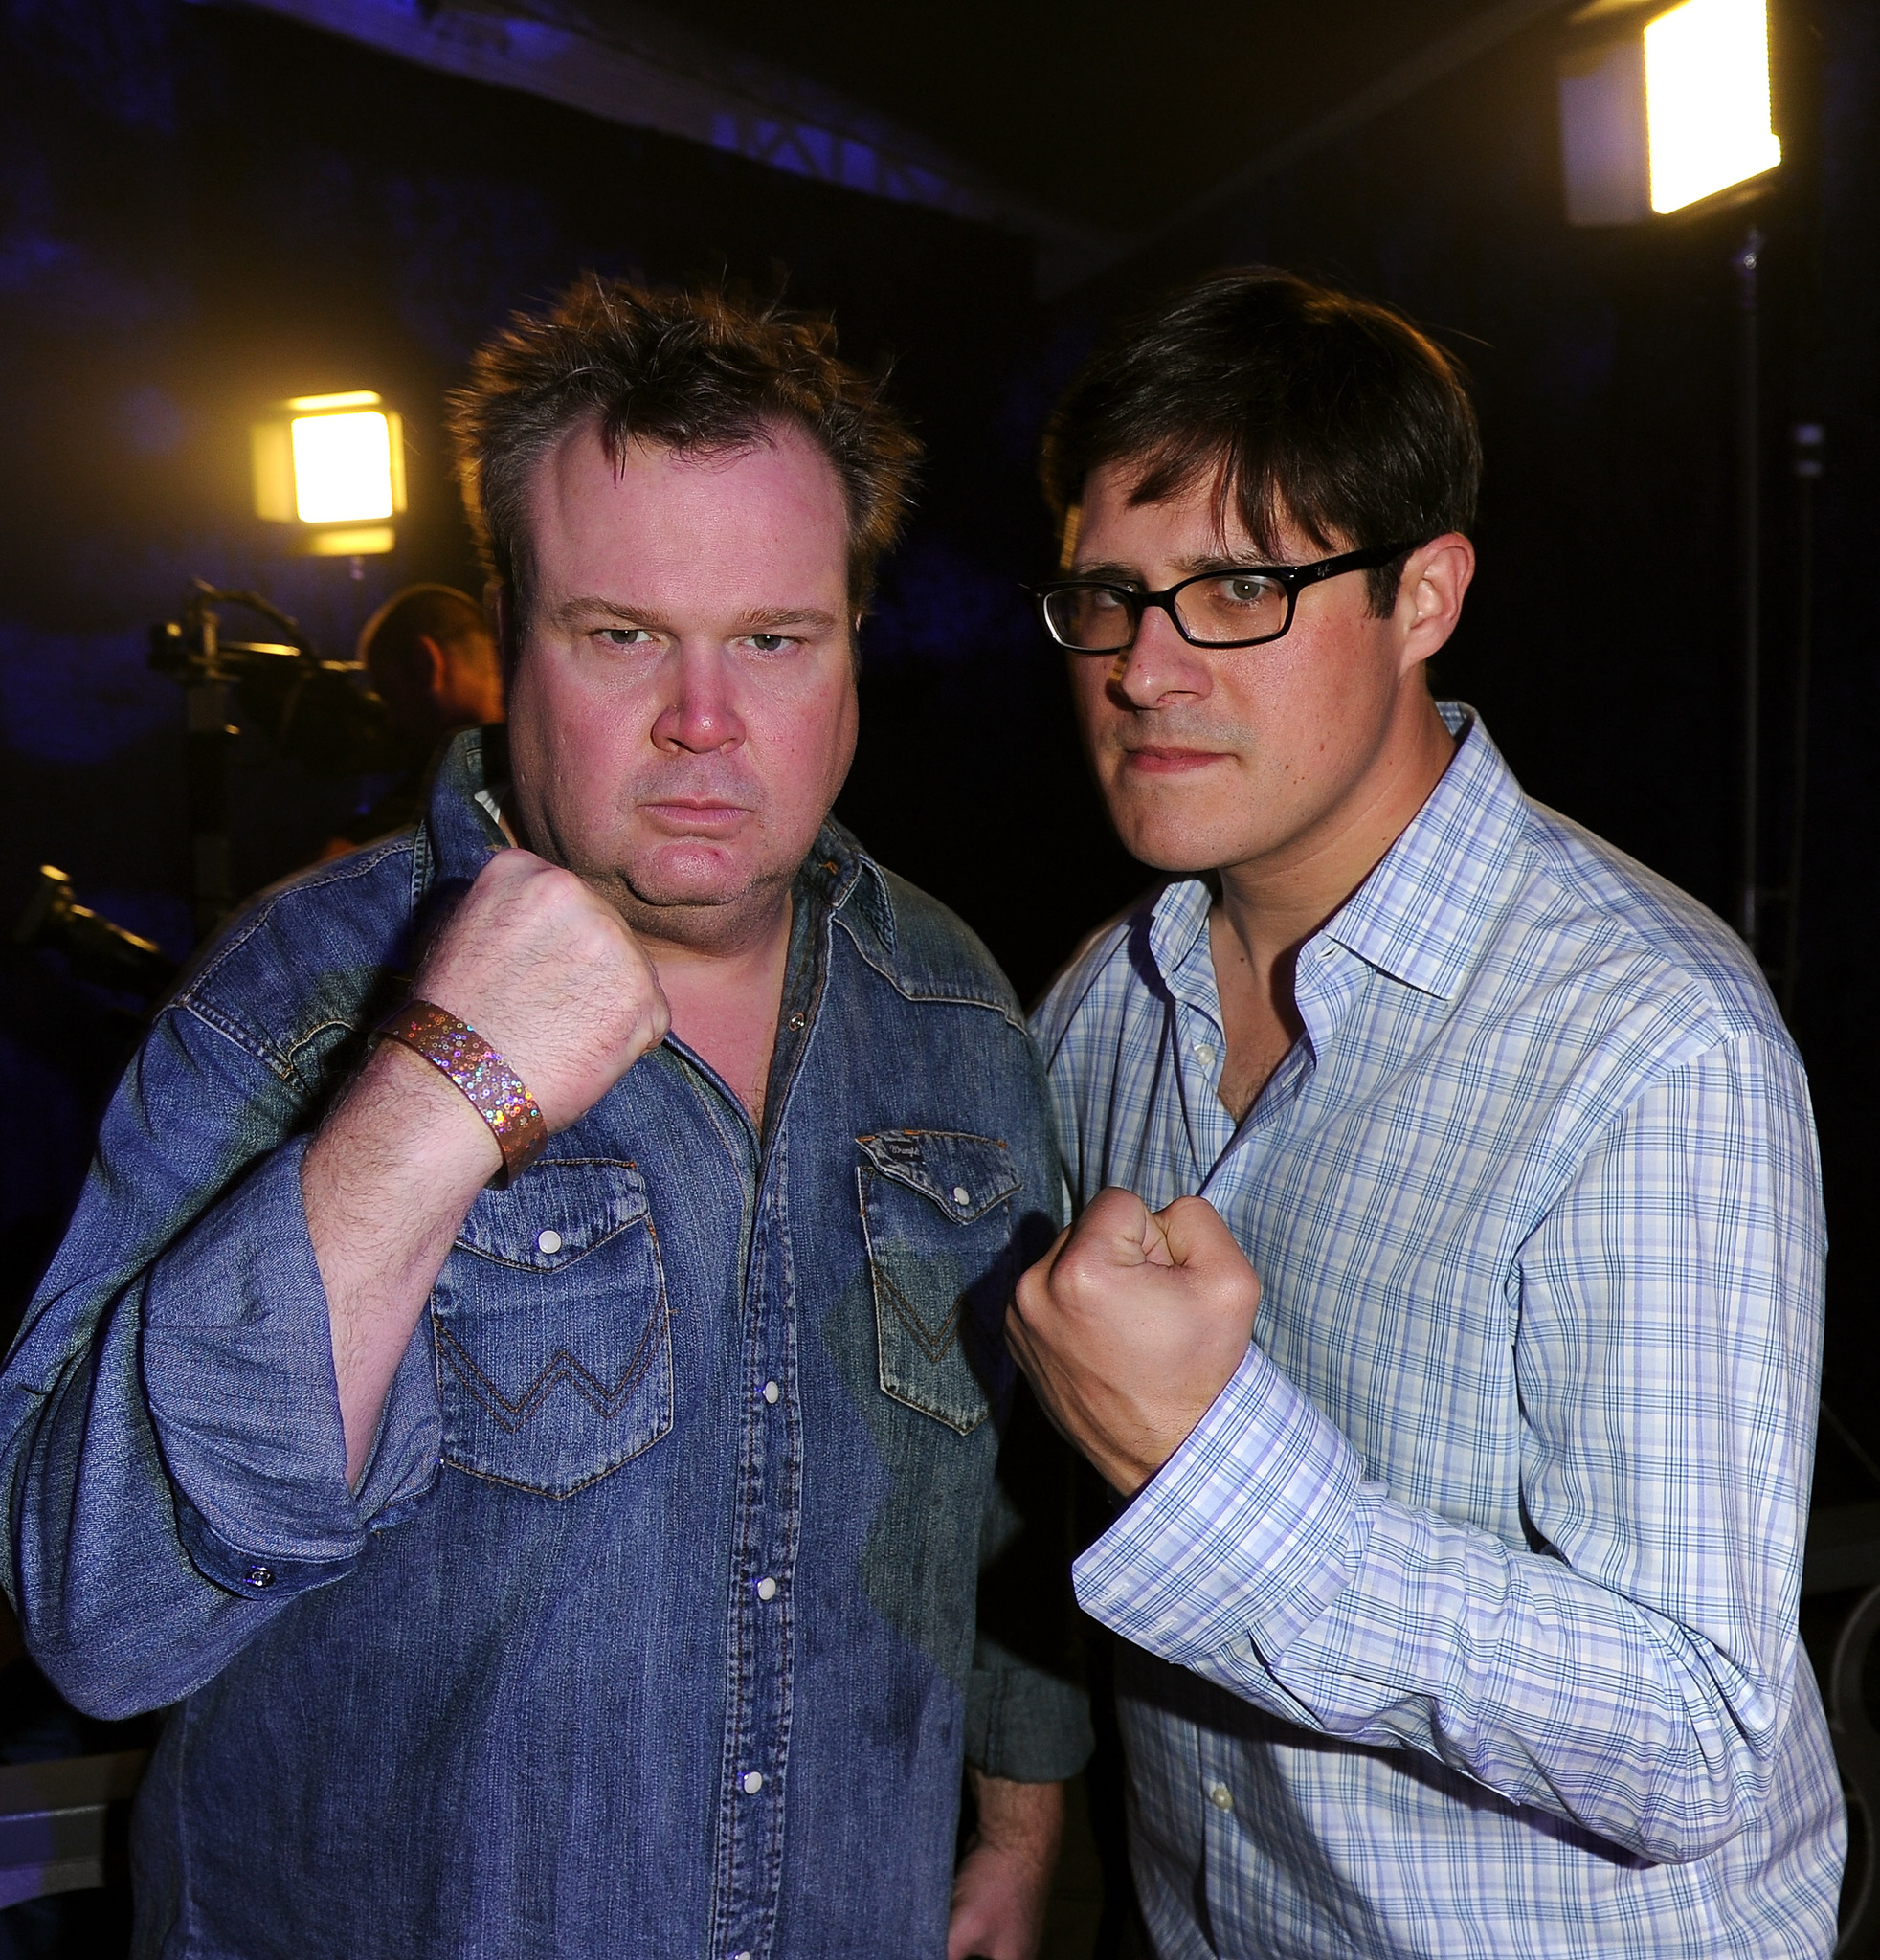 Eric Stonestreet and Rich Sommer